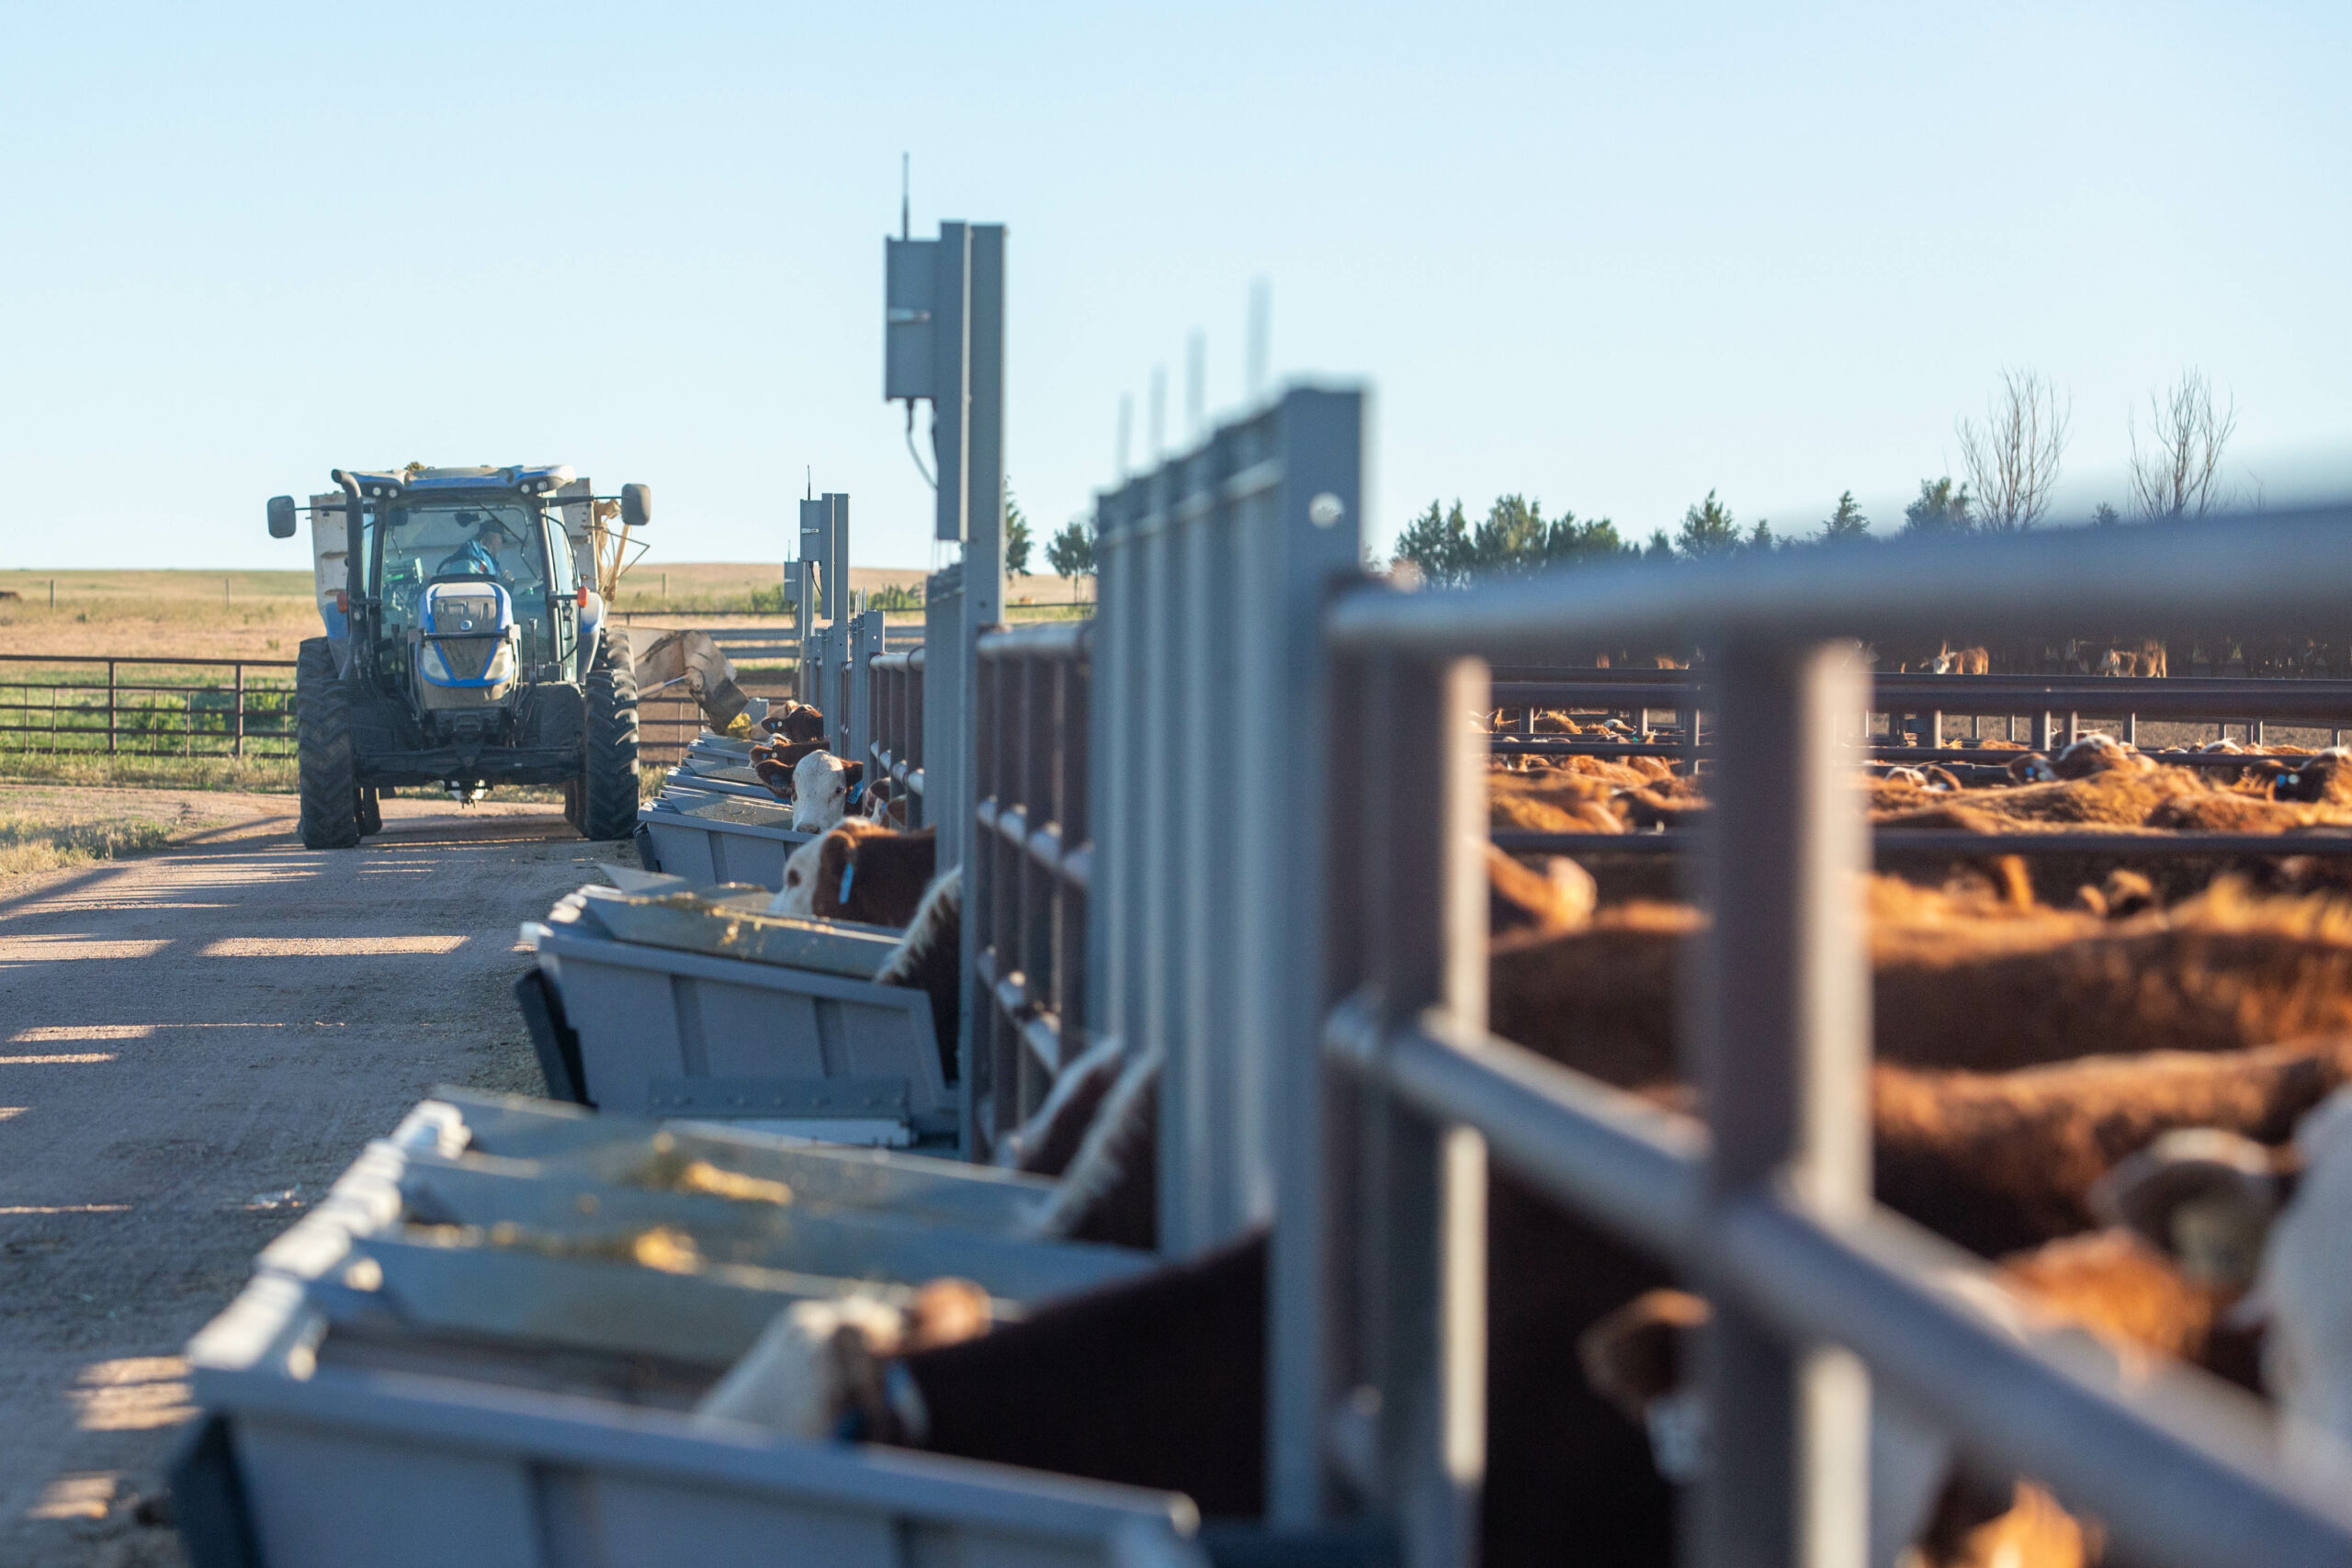 A group of cows in a pen observe as a tractor drives past.